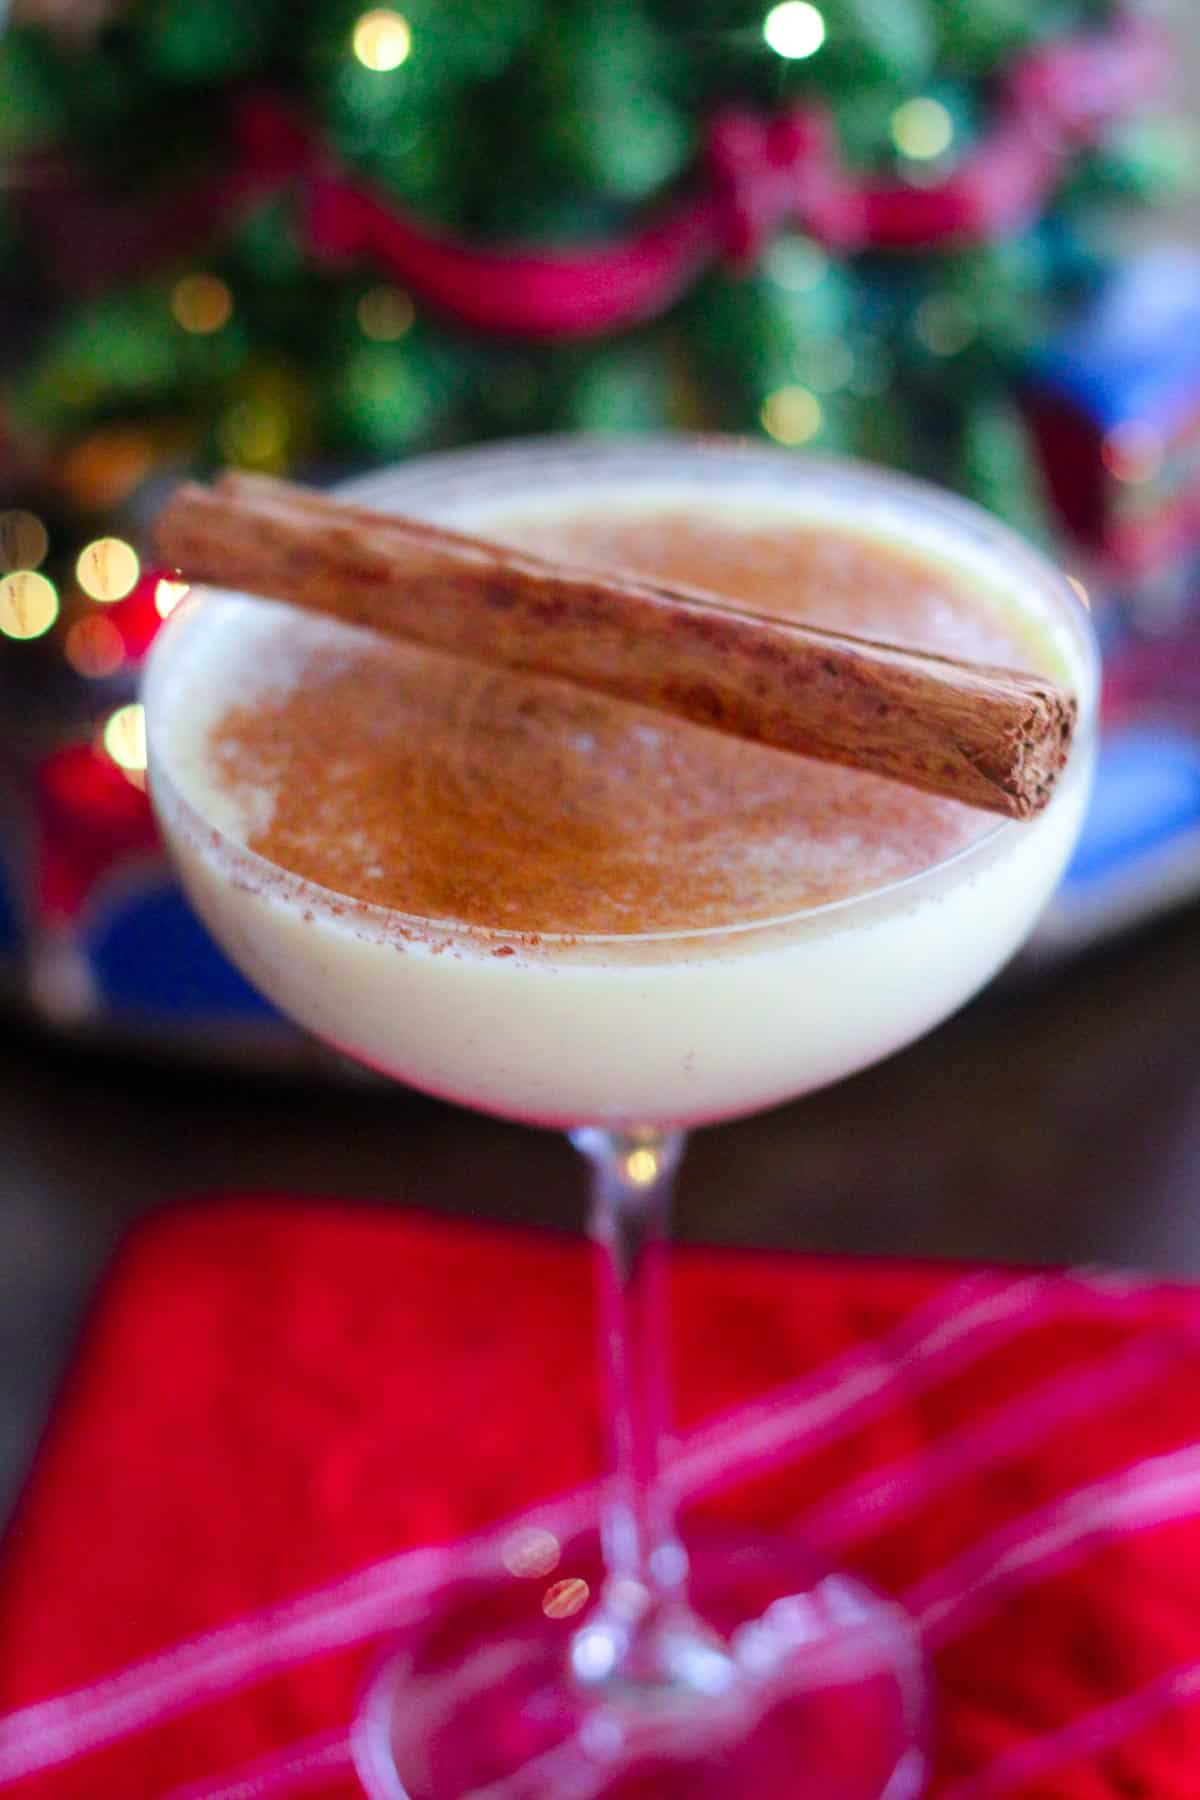 Festive eggnog cocktail with rum and kahlua over a red kitchen napkin, in front of Christmas lights.